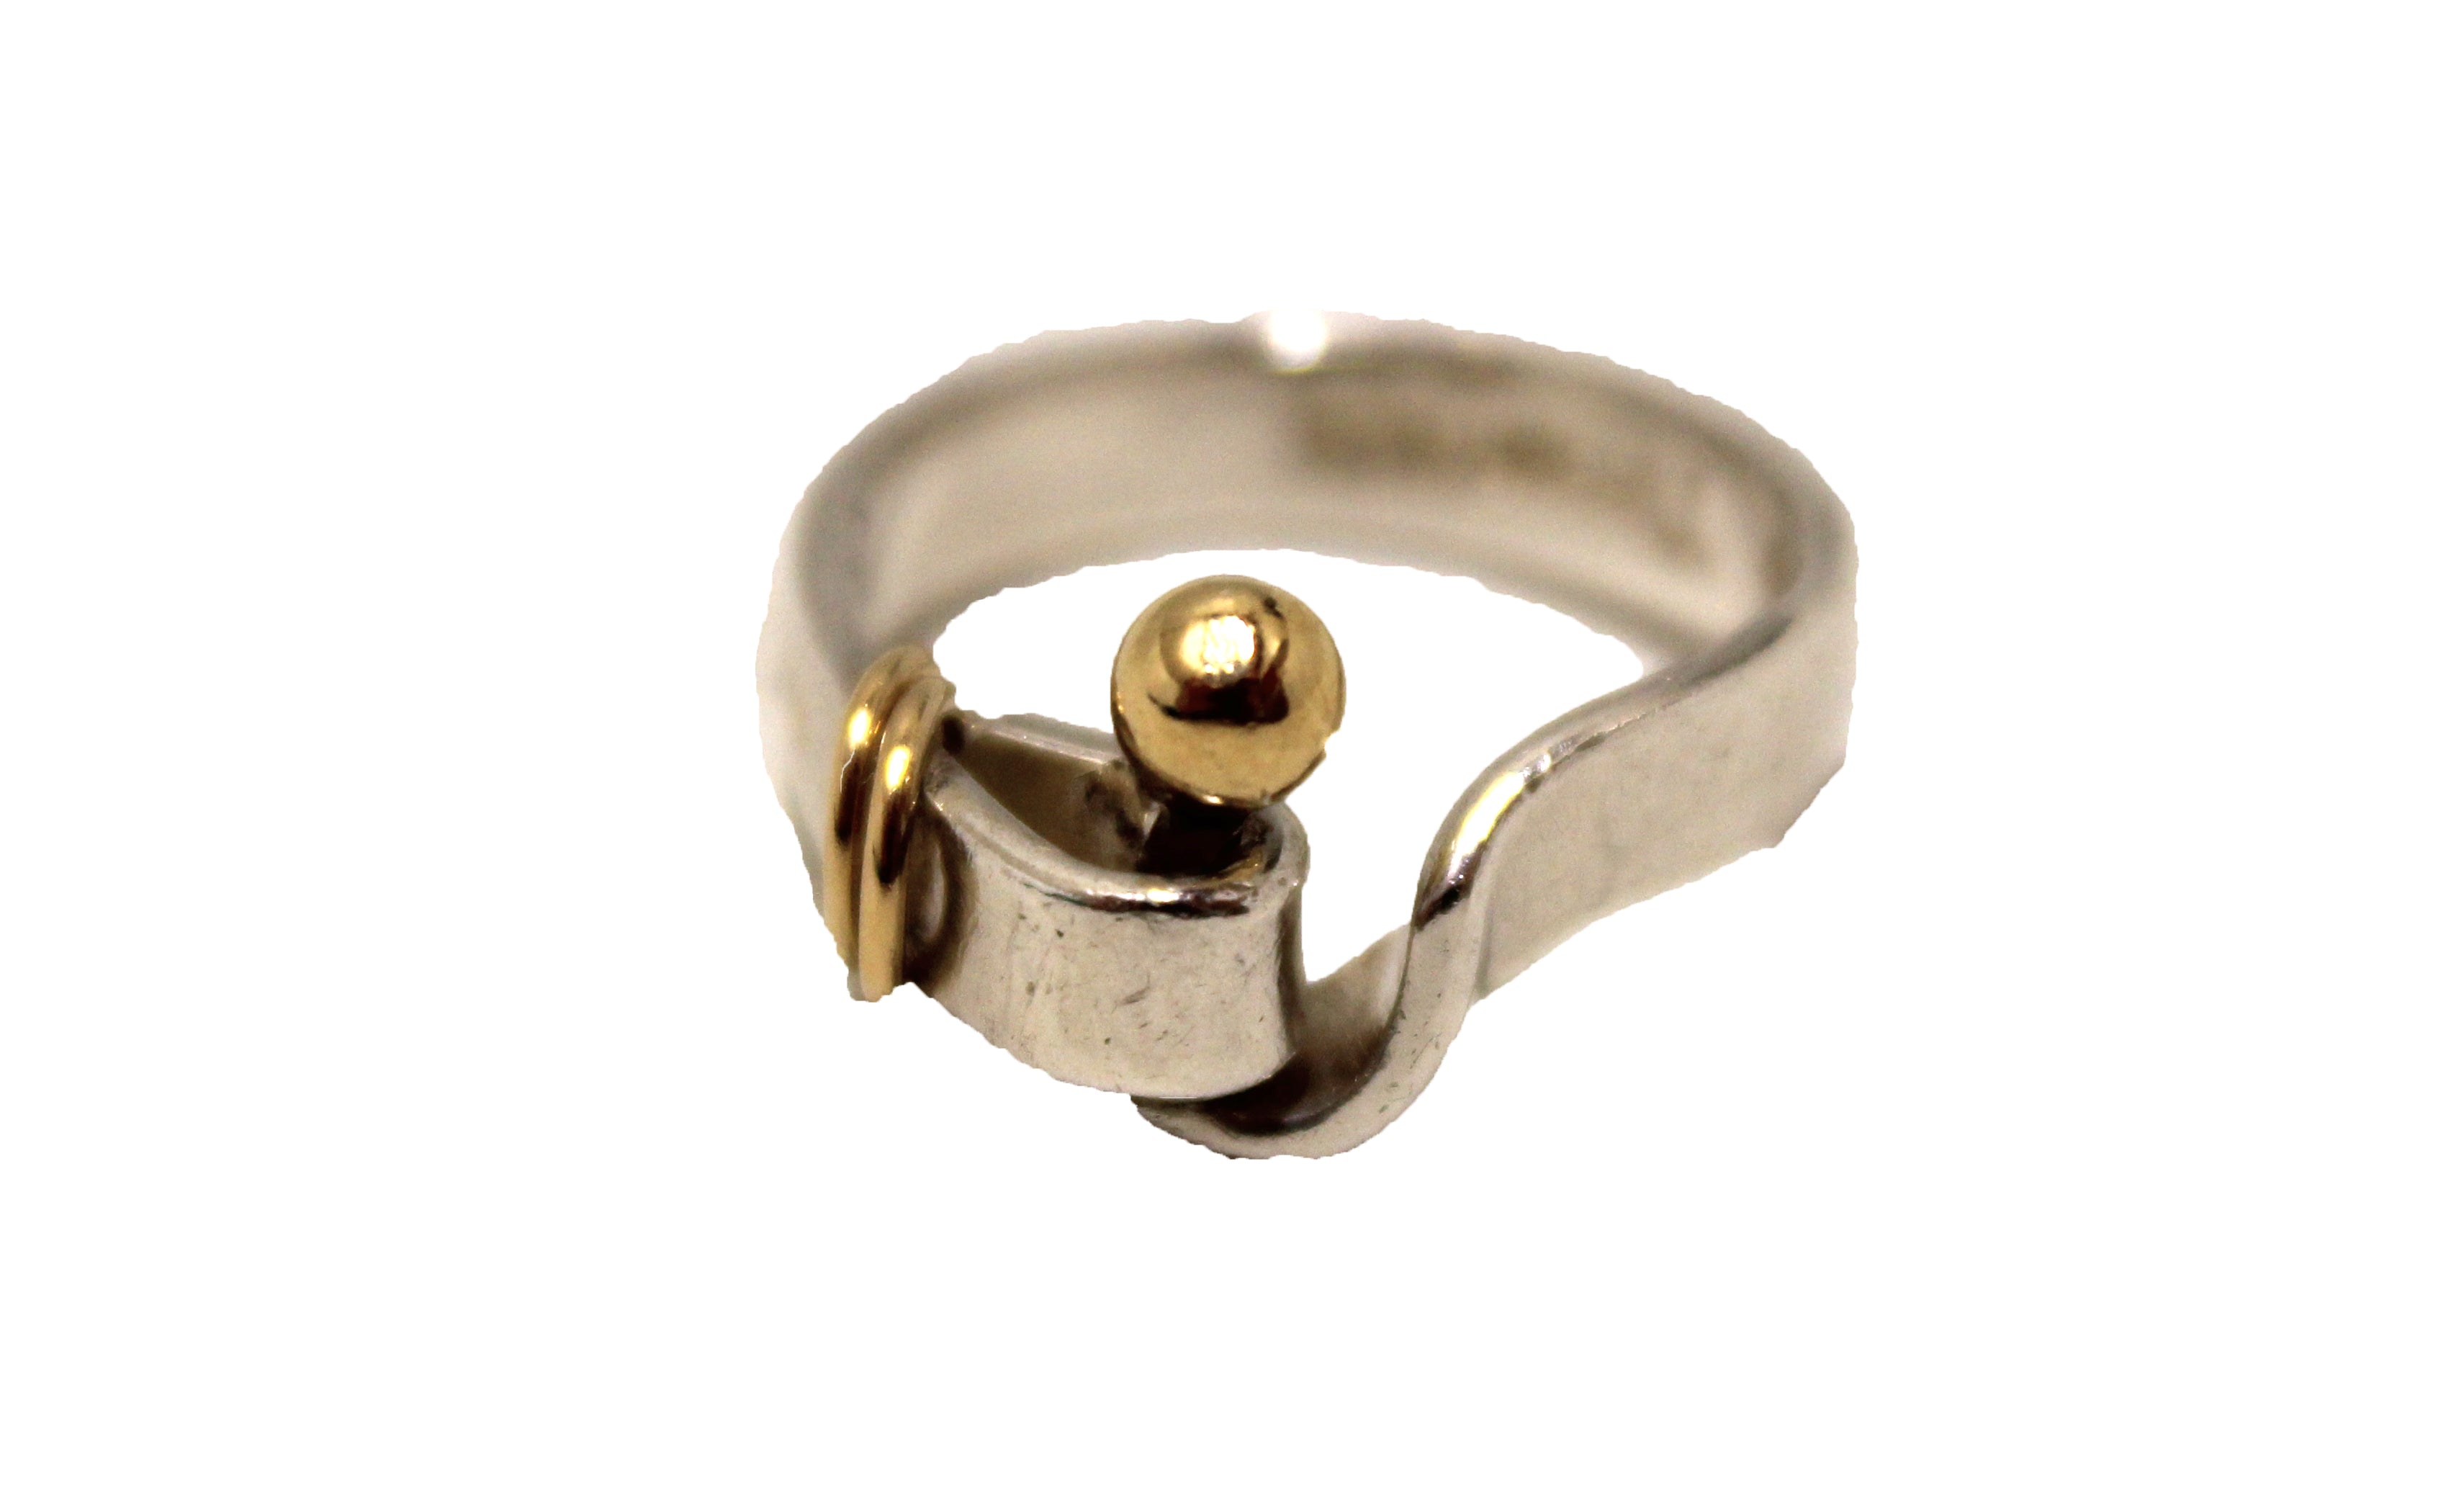 Authentic Tiffany & Co. 18K Gold & Sterling Silver 925 Hook and Eye Love Knot Ring Size 5.5